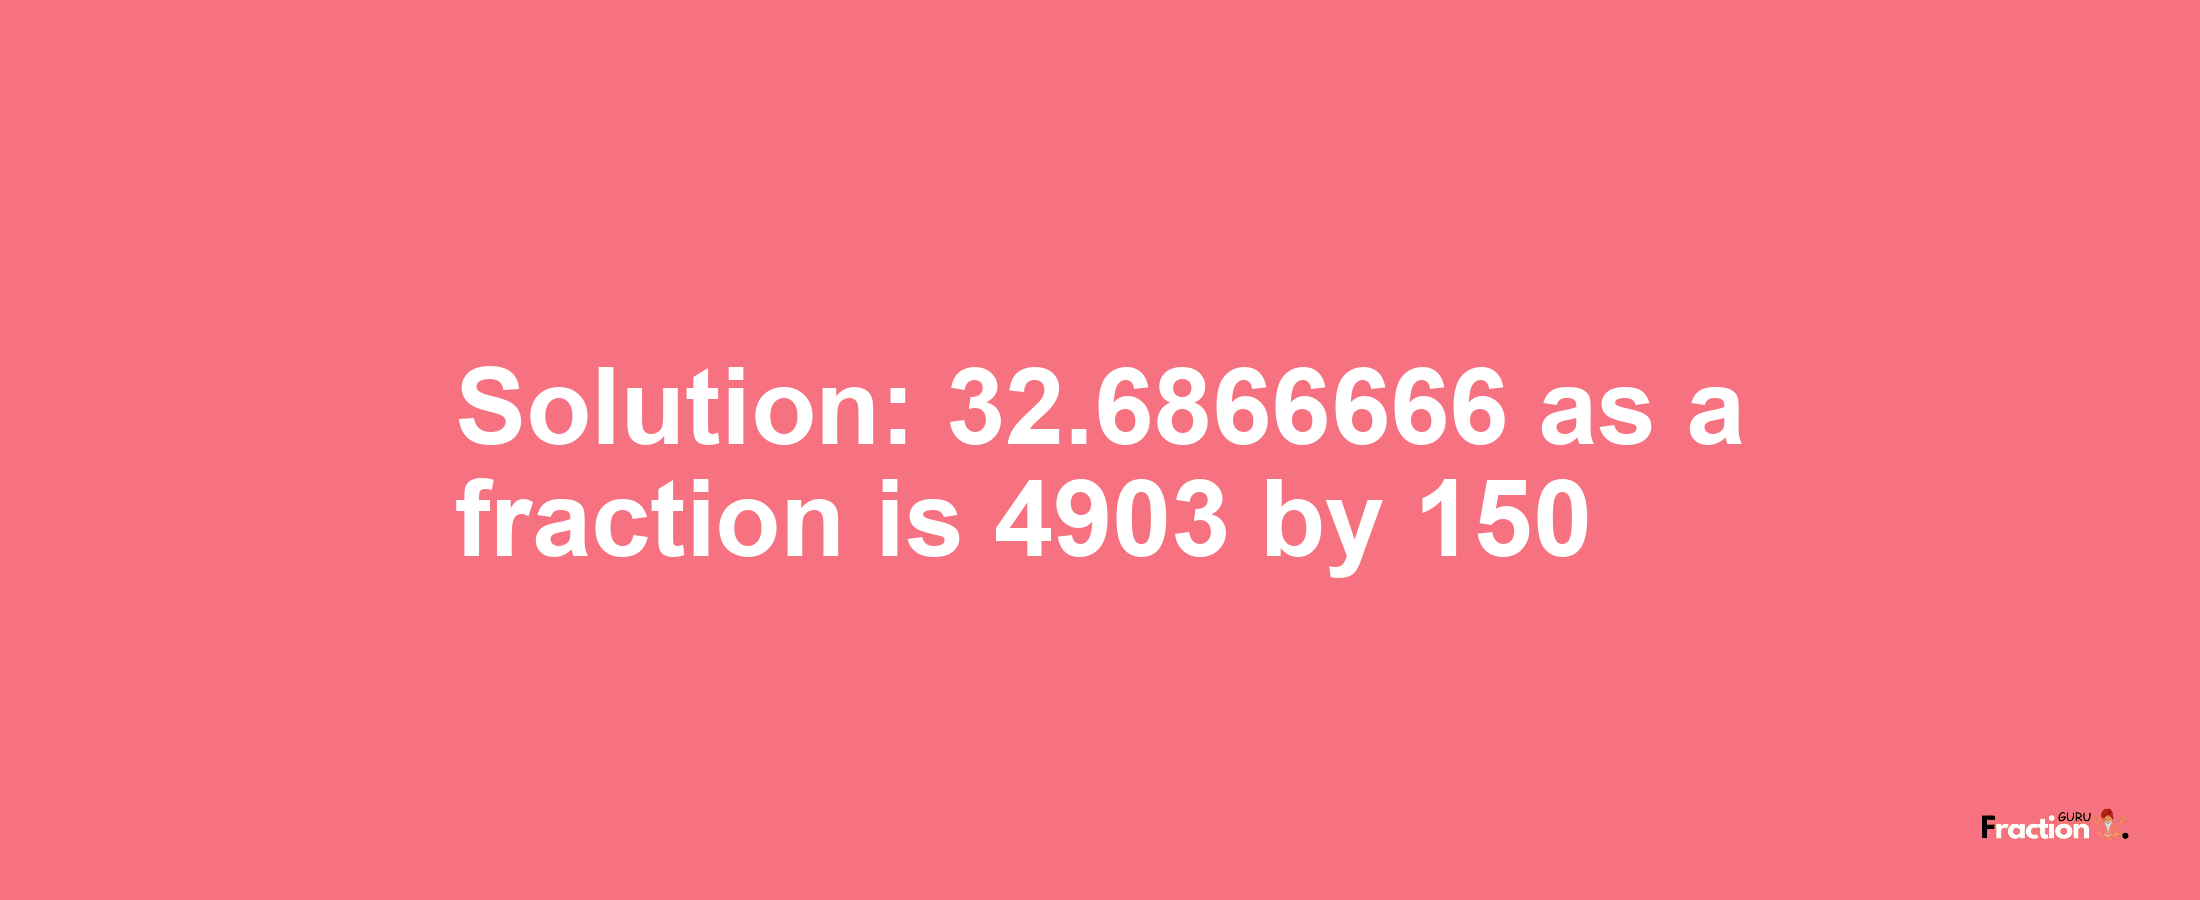 Solution:32.6866666 as a fraction is 4903/150